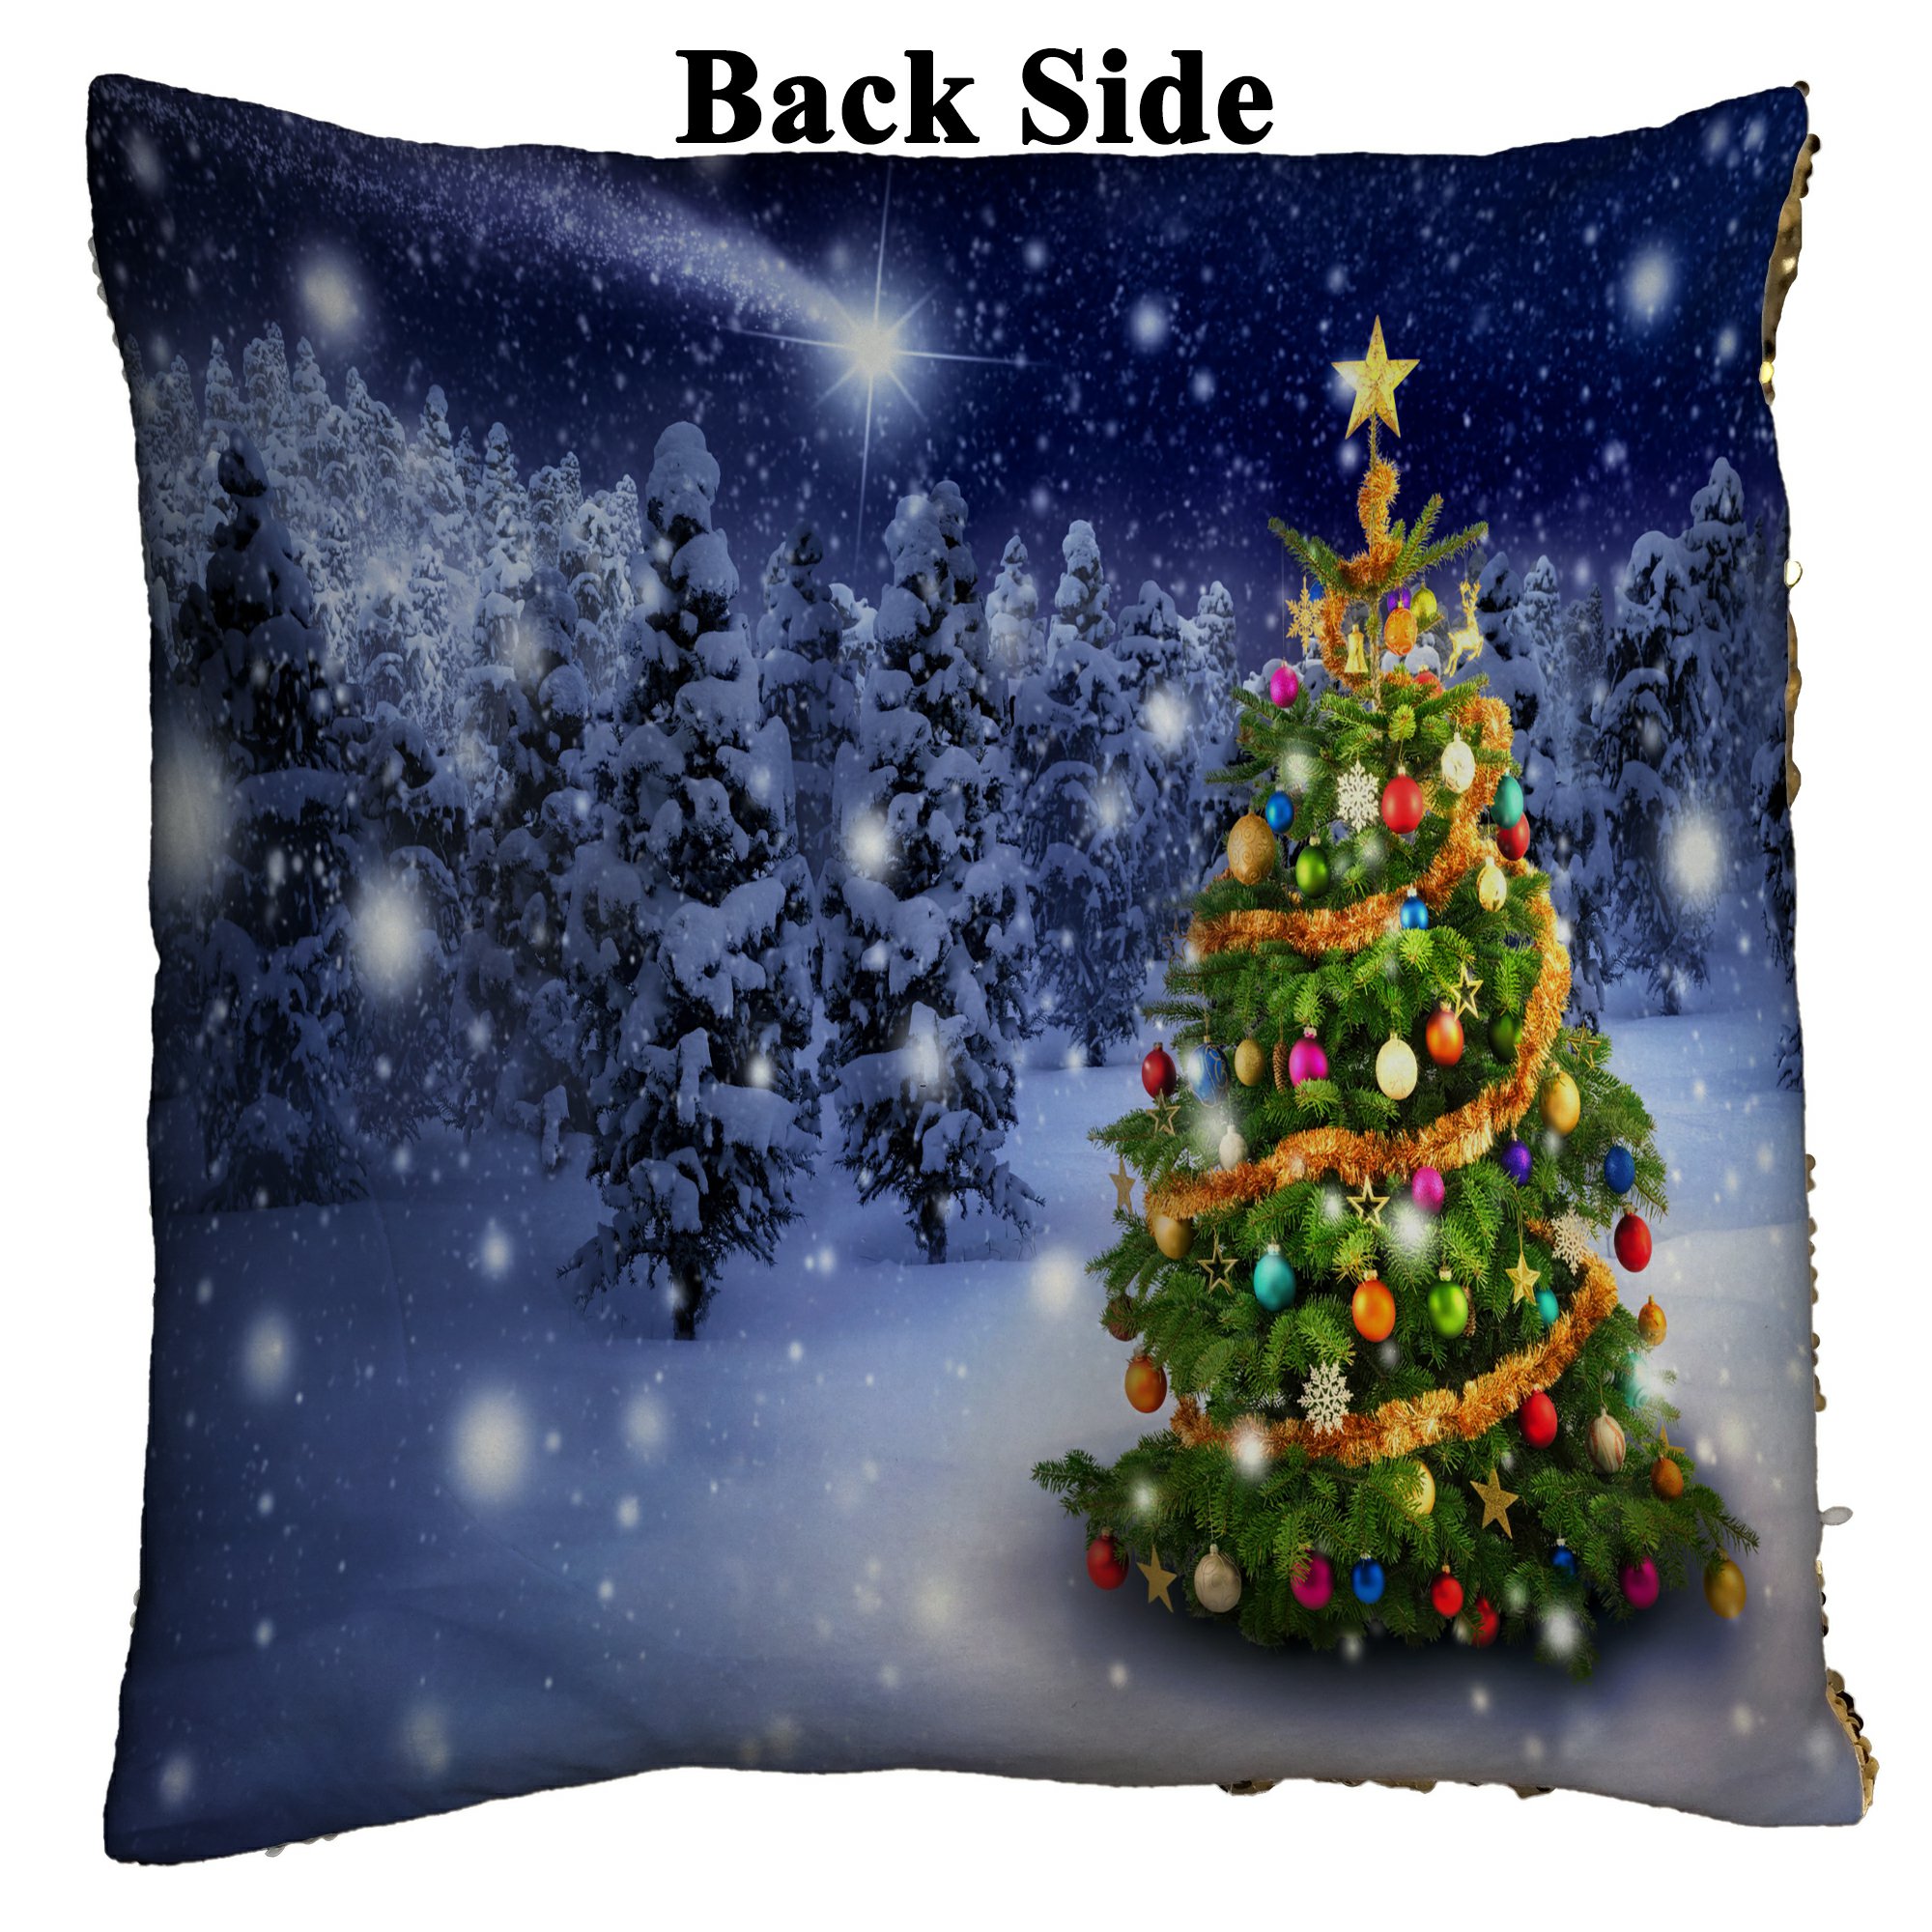 GCKG Snow Tree Scenery Pillowcase, Colorful Merry Christmas Tree with Holiday Presents Reversible Mermaid Sequin Pillow Case Home Decor Cushion Cover 16x16 inches - image 2 of 3